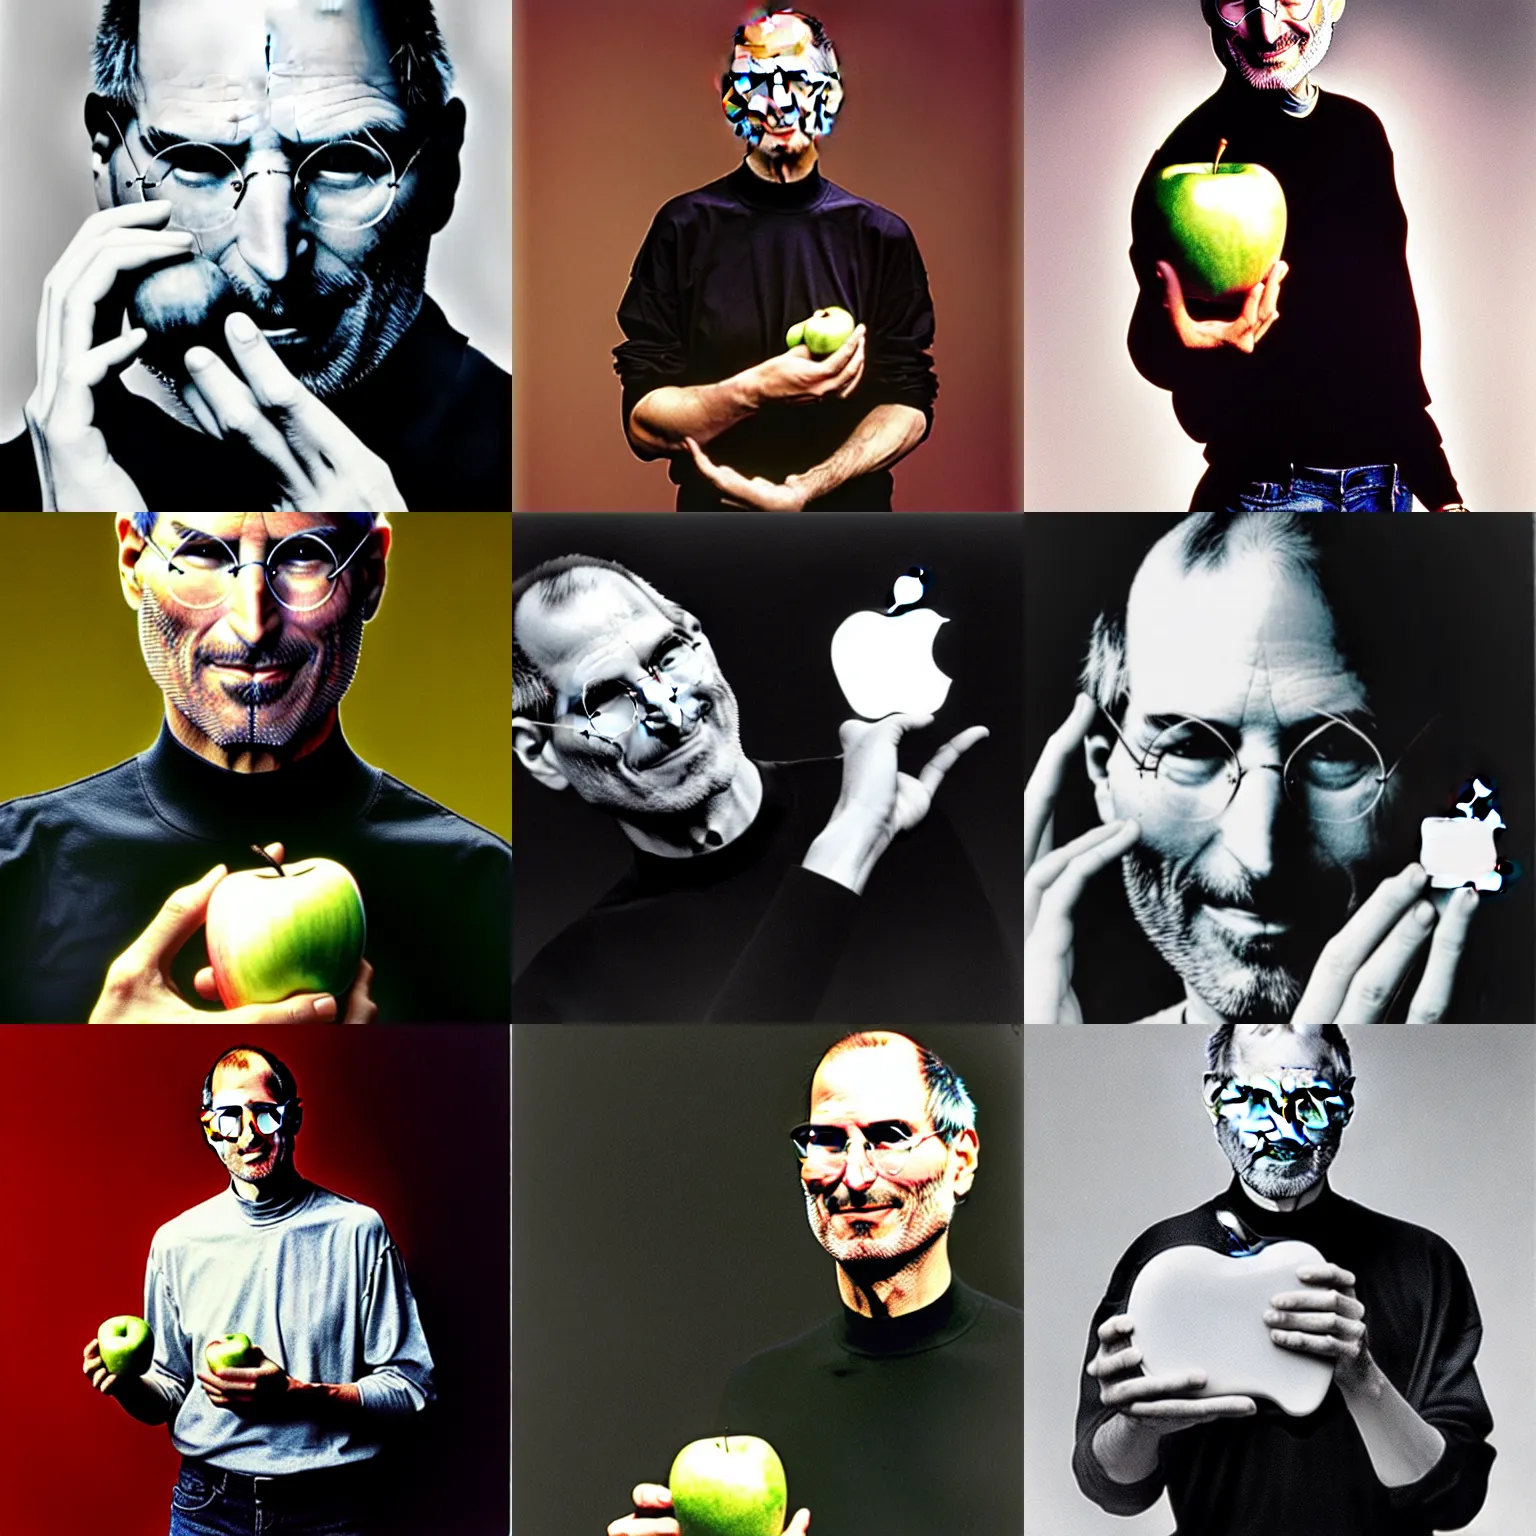 Prompt: happy steve jobs holding an apple, by annie leibovitz